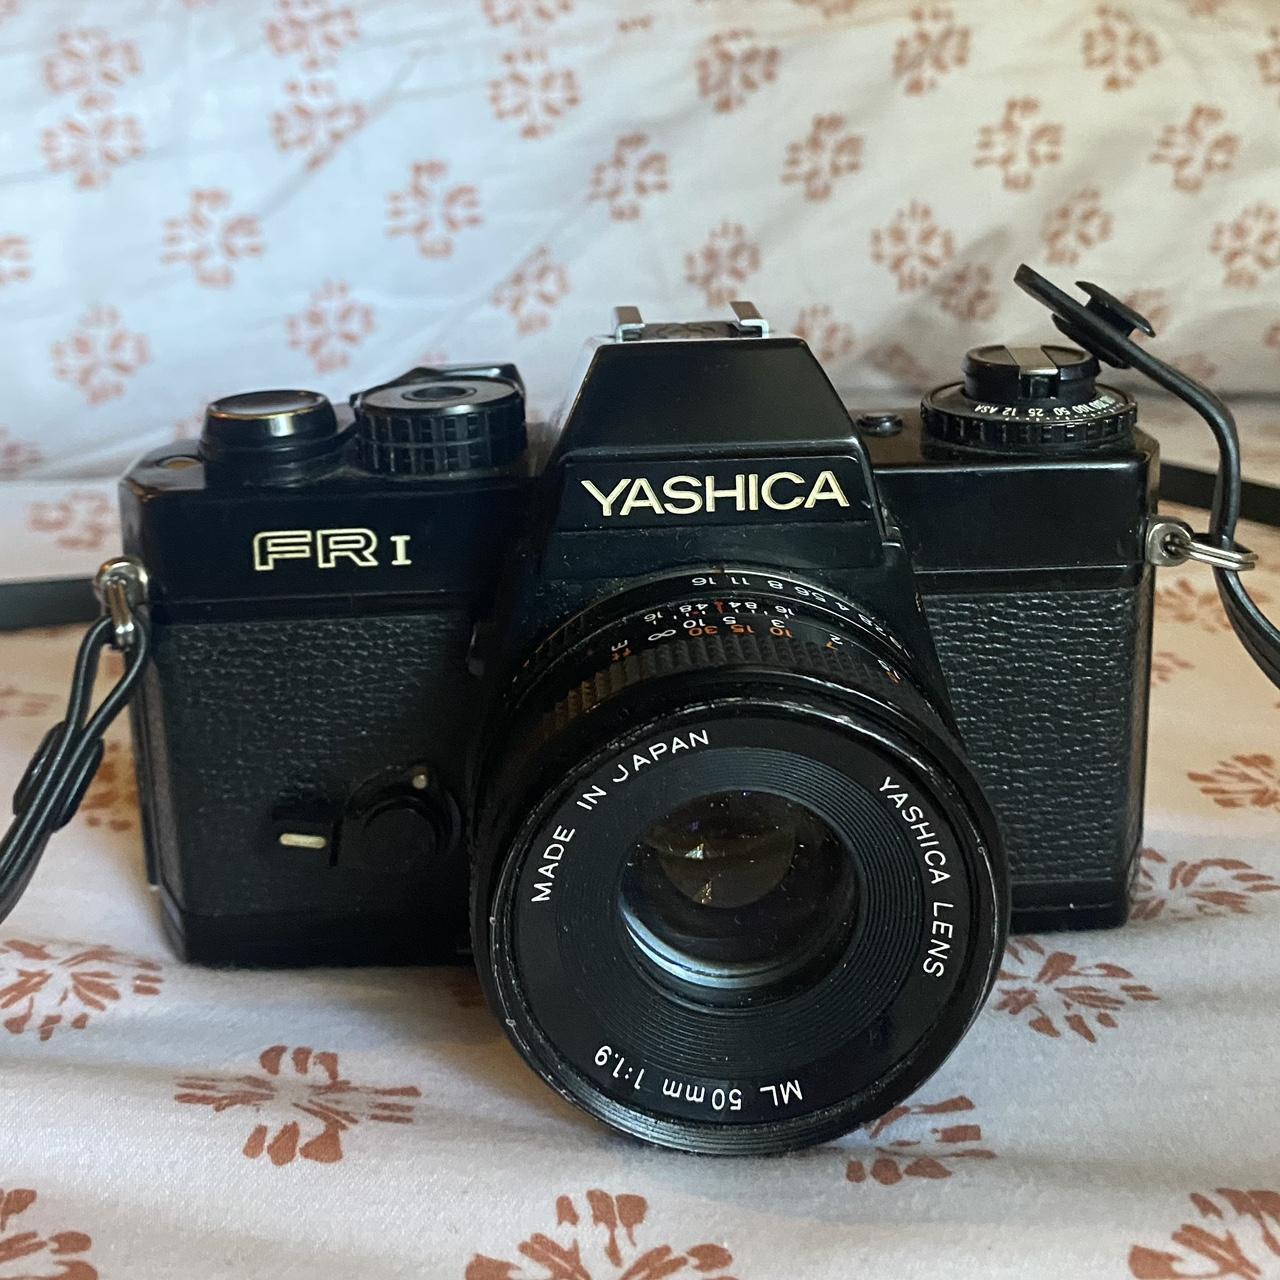 Yashica Cameras-and-accessories